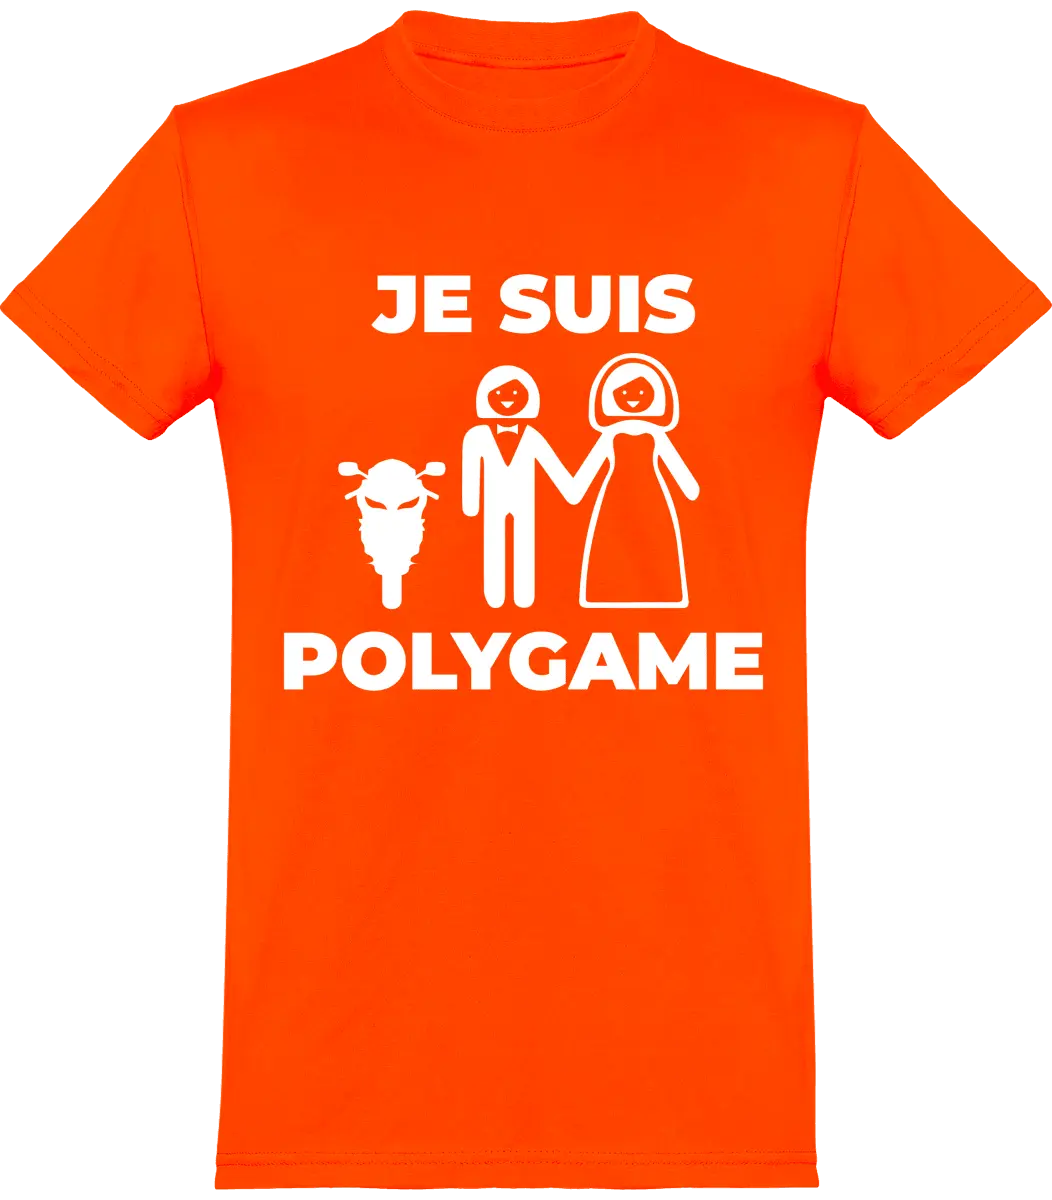 T-shirt Motard "Je suis polygame" | Mixte - French Humour